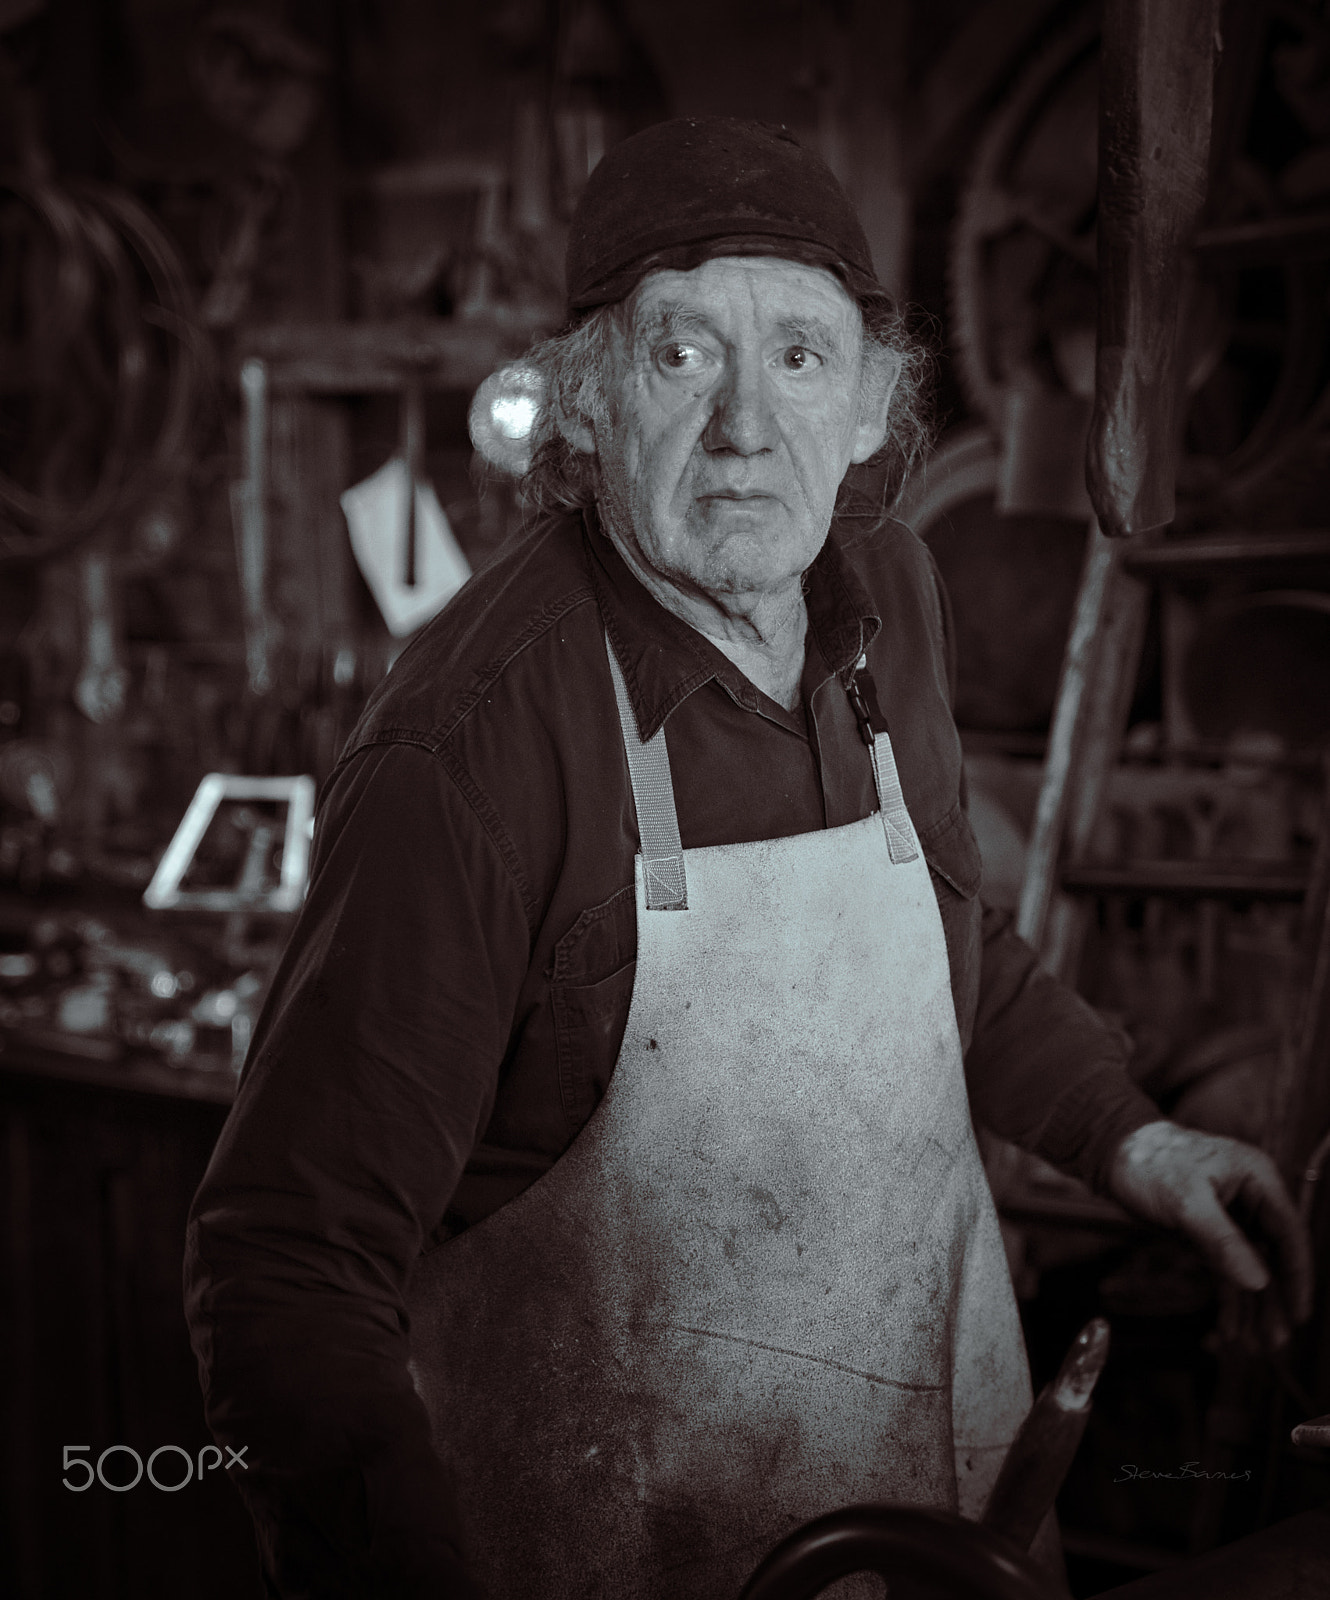 Pentax K-1 sample photo. The ironmonger works amidst a shed full of tools and creations see sovereignhill.com.au photography